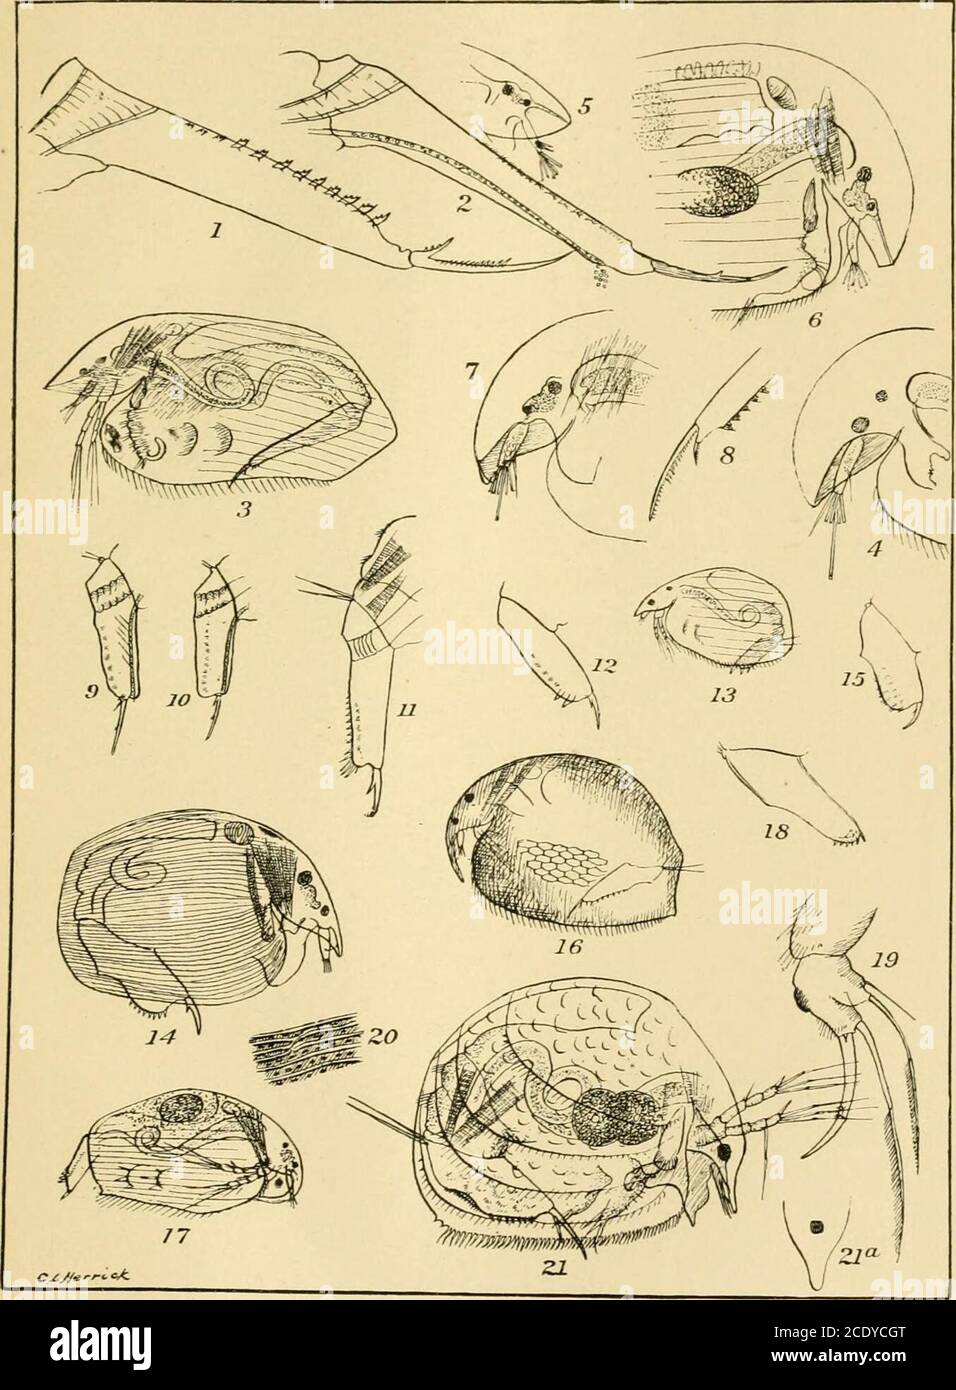 . A final report on the Crustacea of Minnesota, included in the orders Cladocera and Copepoda, together with a synopsis of the described species in North America, and keys to the known species of the more important genera . PLATE I. Camptocercus rectirostris^ post-abdomen of female. do. post-abdomeu of male. do. male. Camptocercus biserratus, head. Camptocercus latirostris, head of male. do., head of female, Camptocercus lilUjehorgii^ head. do., post-abdomeu of female. Acroperus leucocephalus, post-abdomen of male. Acroperus angustatus, ^ Alona temiicaudis, post-abdomen. Alona dentata, post-ab Stock Photo